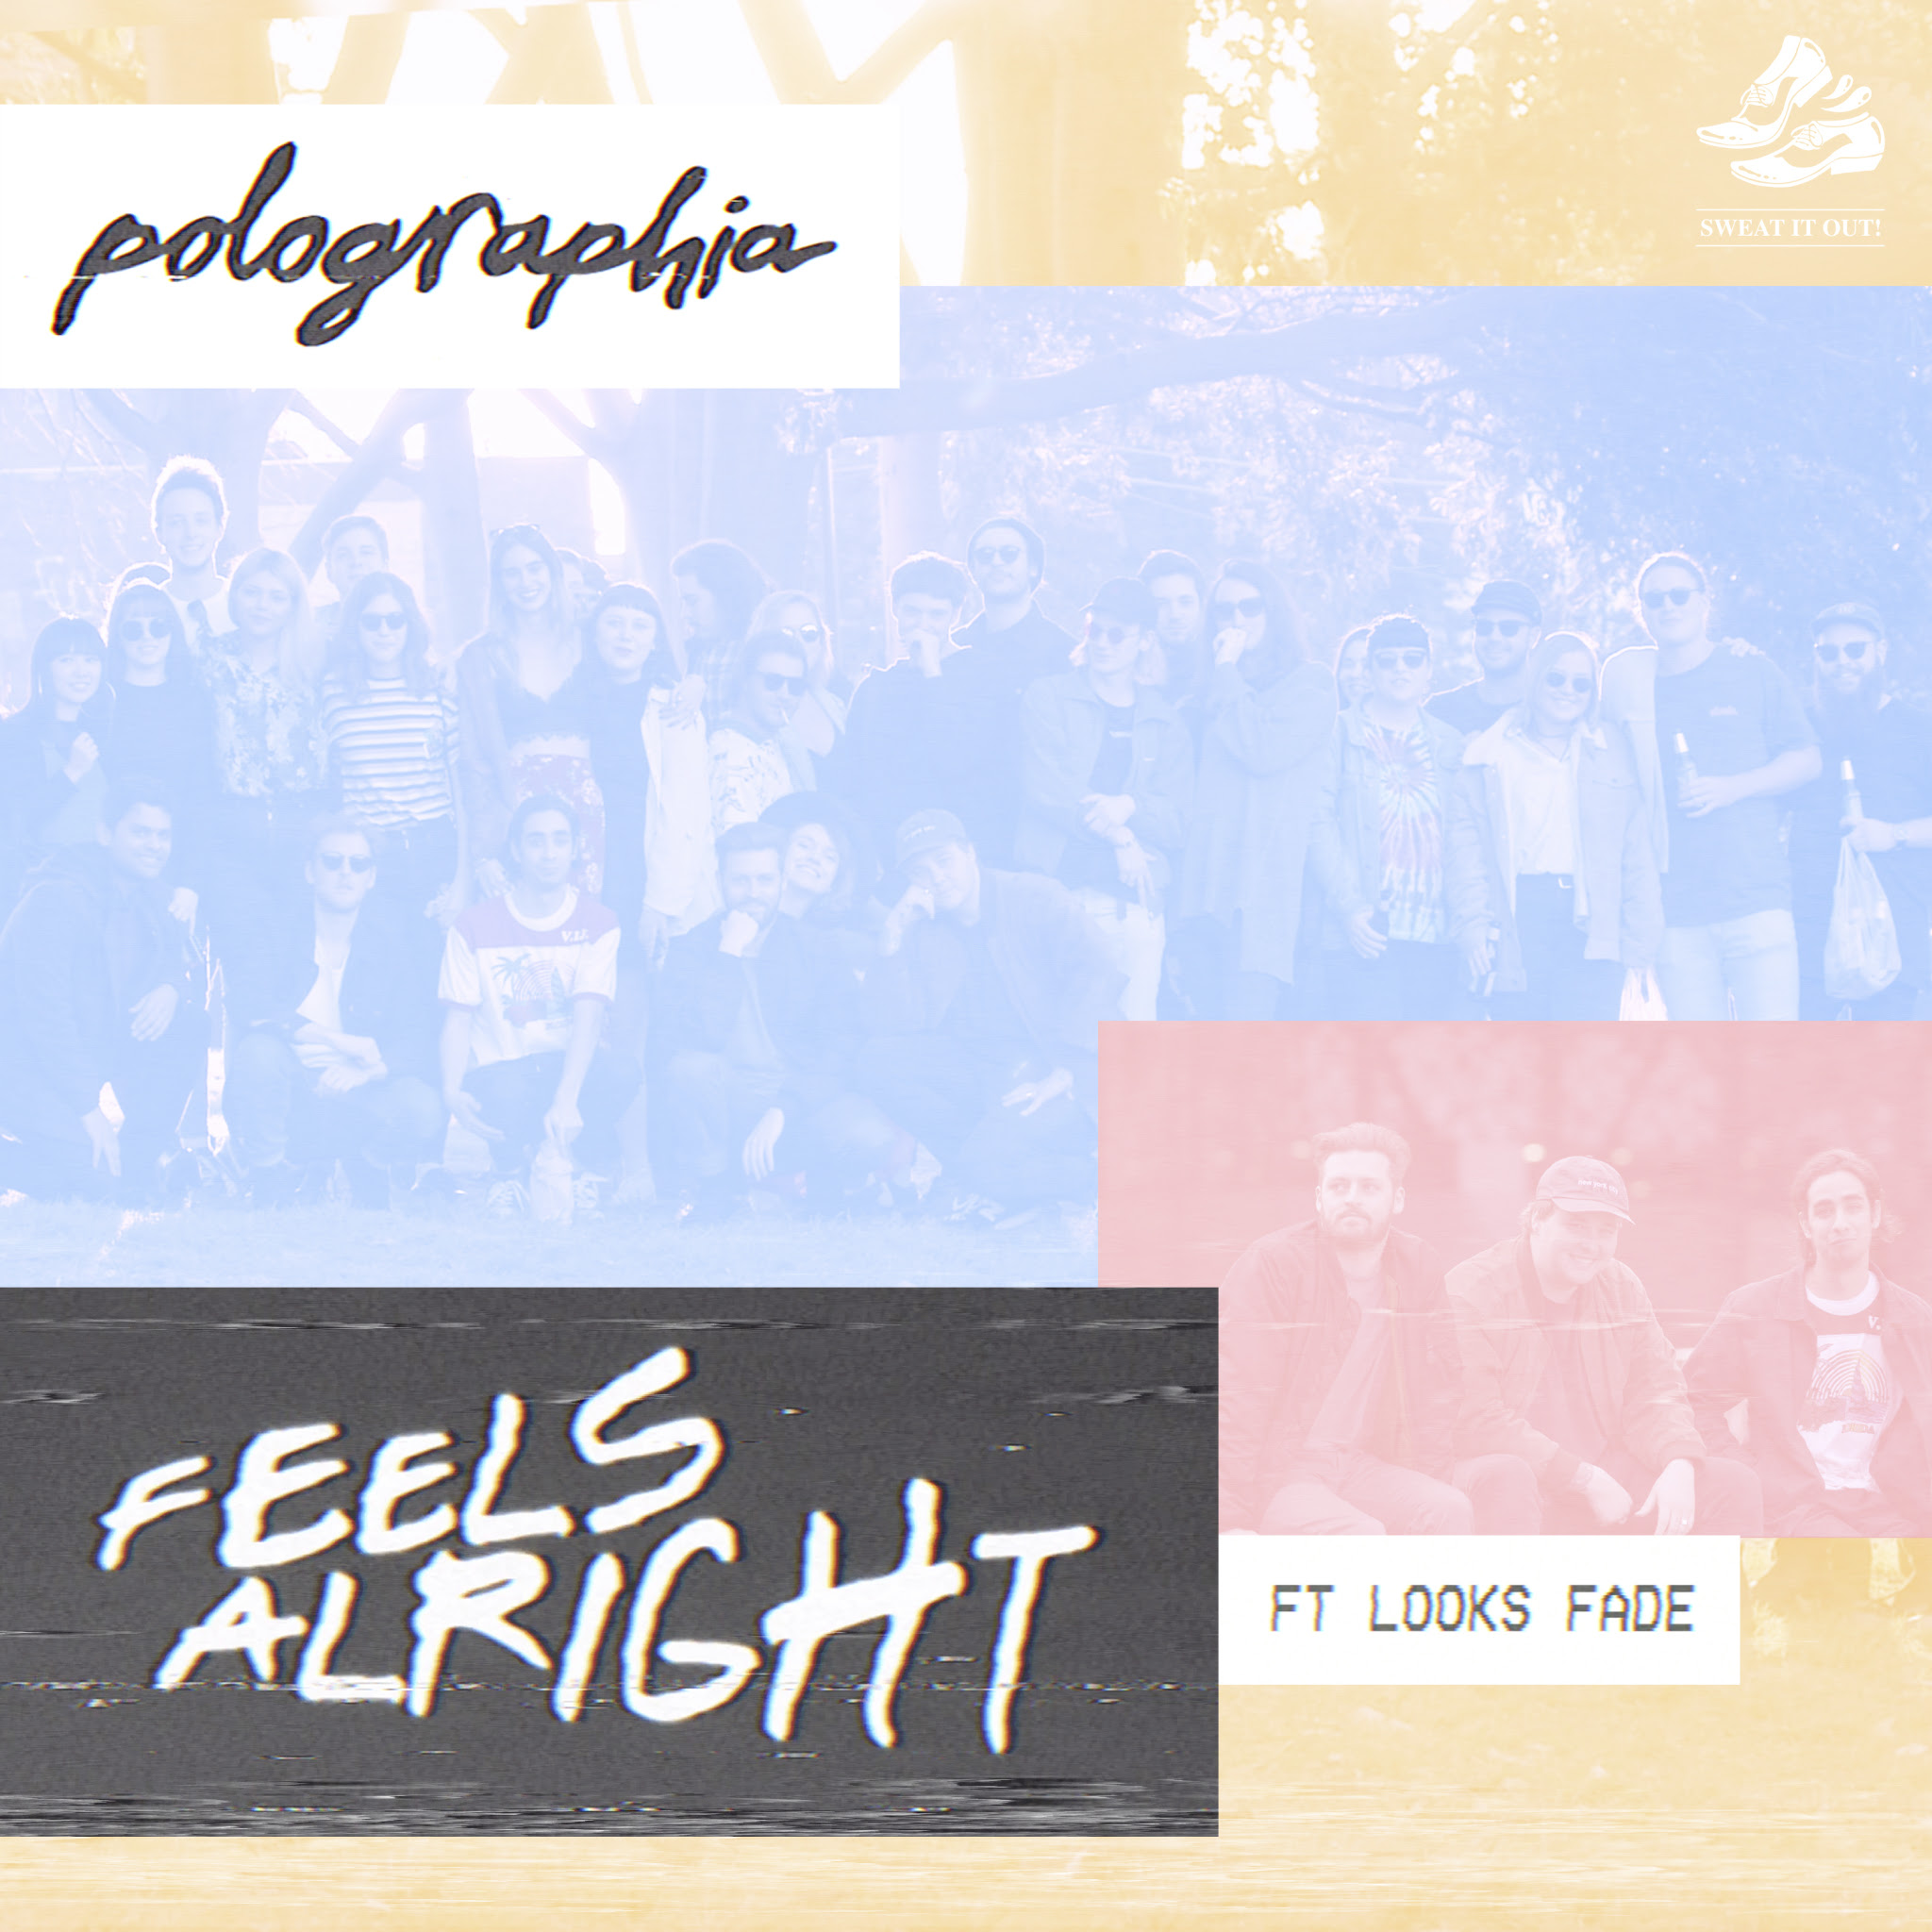 dylts-polographia-feels-alright-ft-looks-fade